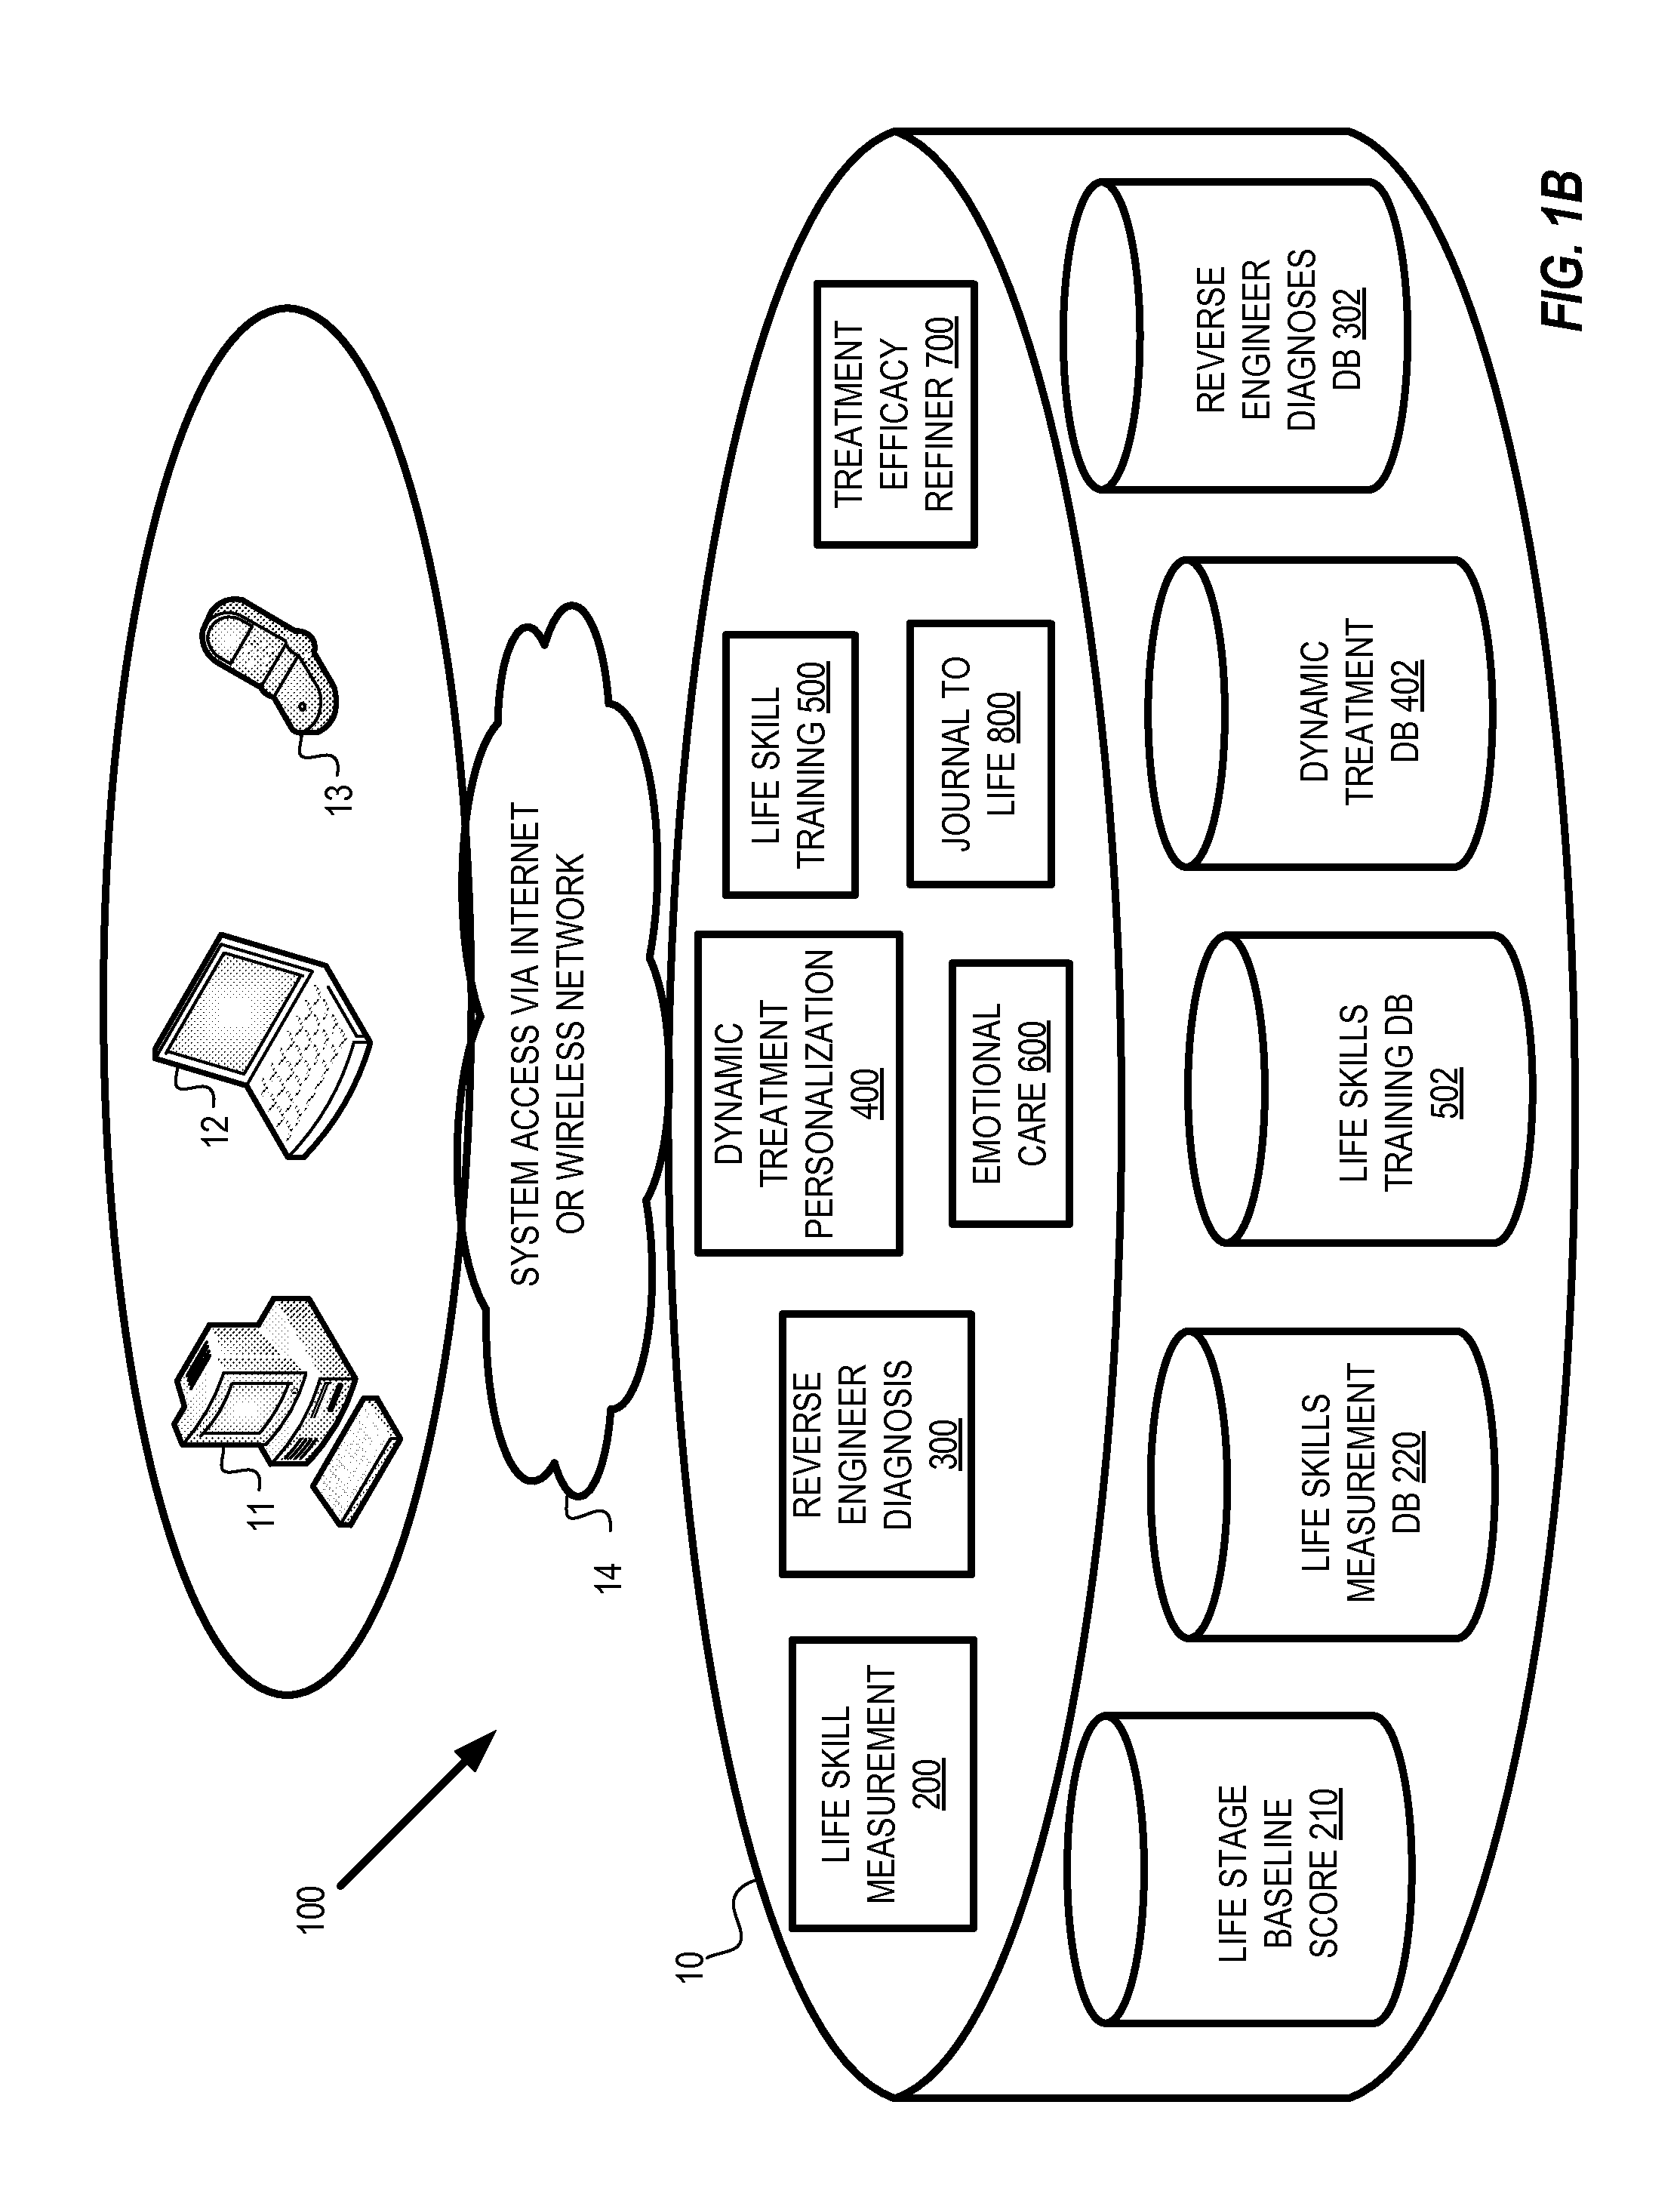 System and method for assessing and improving a users life skills and self-efficacy for life stage readiness